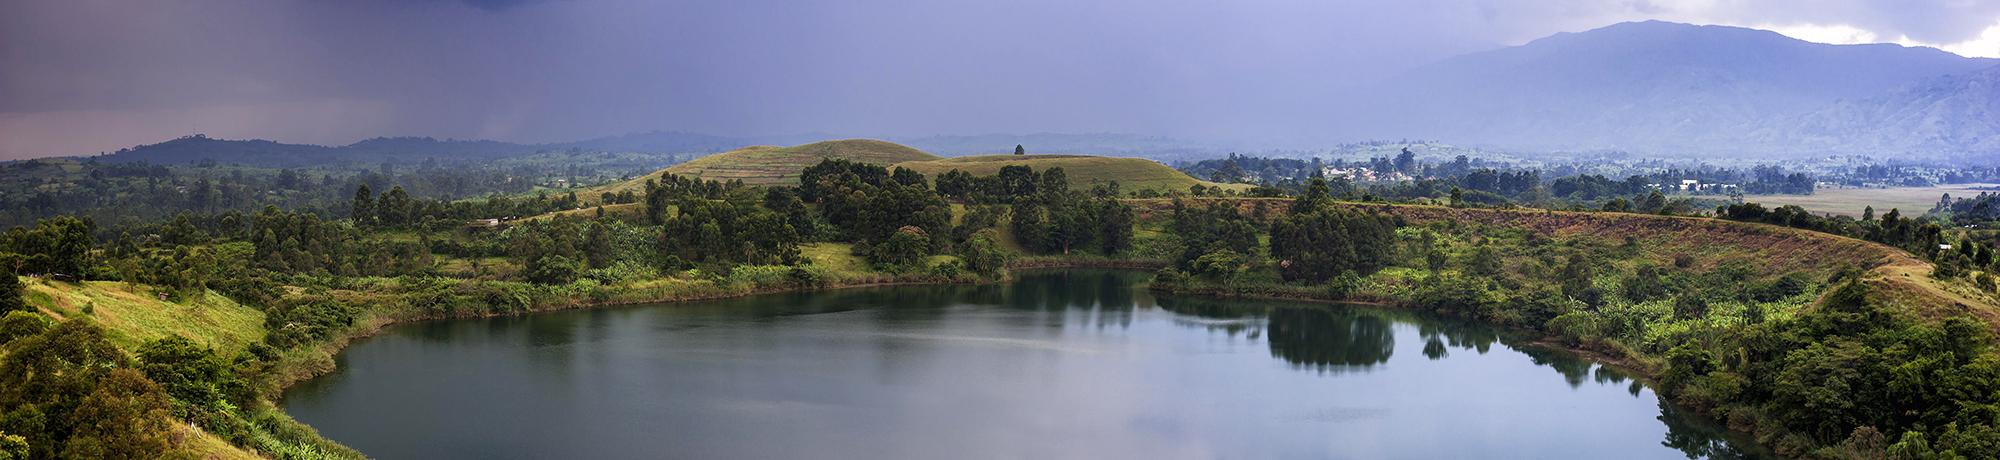 image of a lake in Uganda surrounded by greenery and mountains 